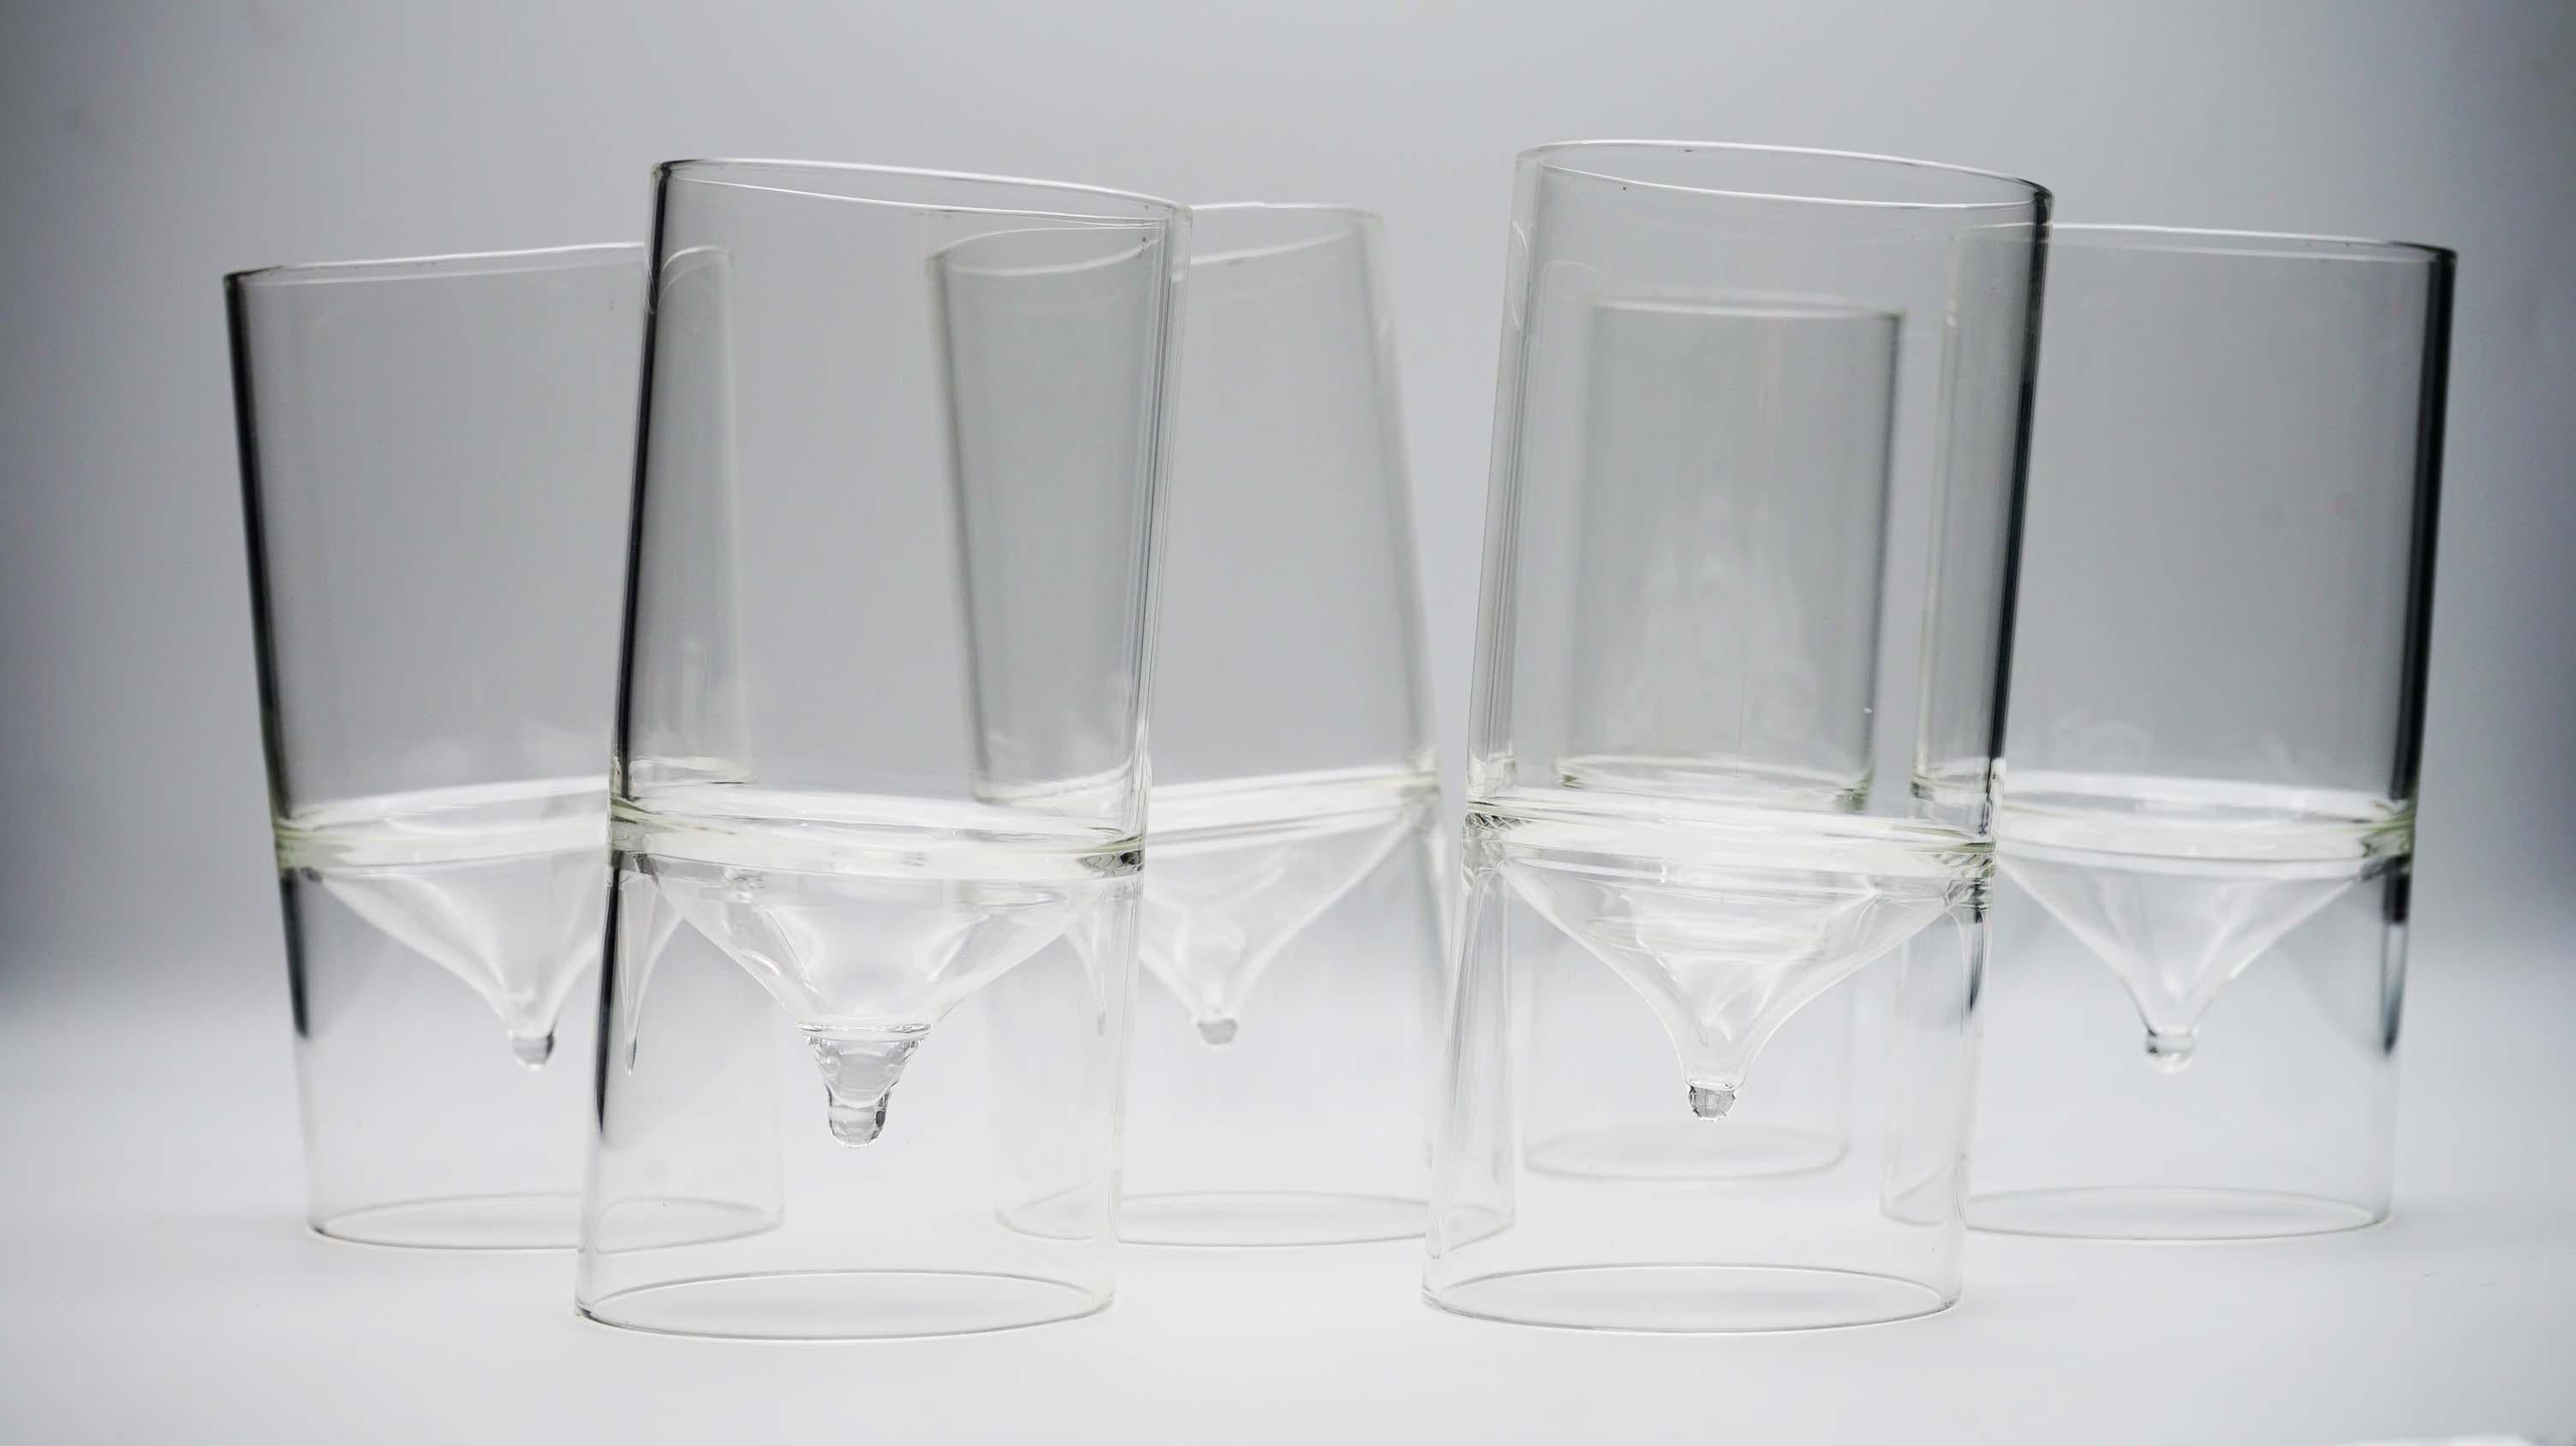 Contemporary 21st Century Set of 6 Glass Tumblers, Hand-Crafted, Kanz Architetti For Sale